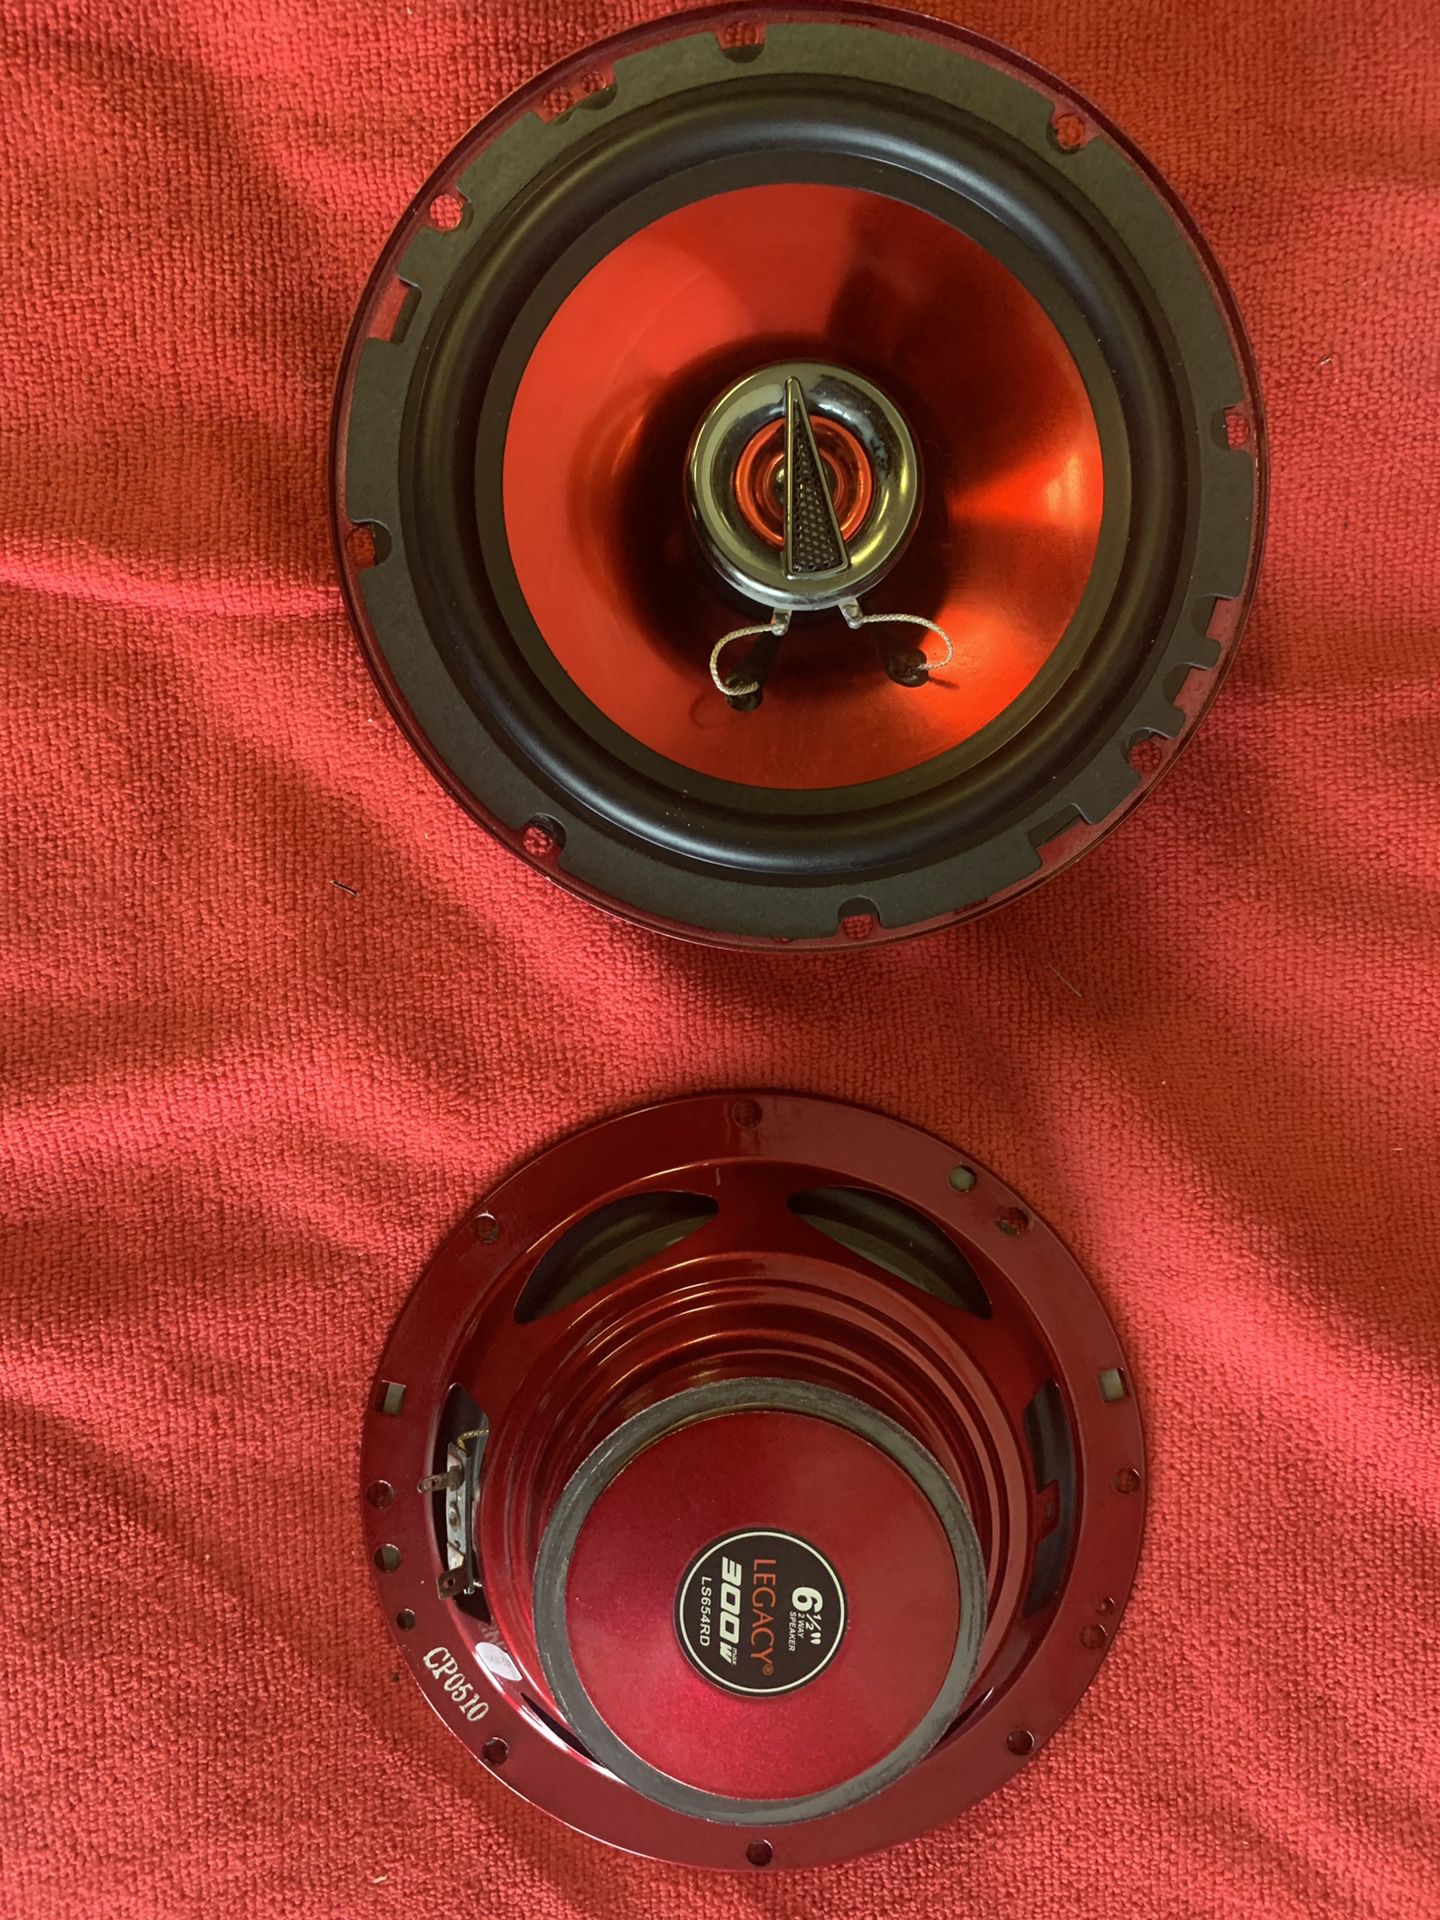 New Legacy car audio . 6.5 inch car stereo speakers